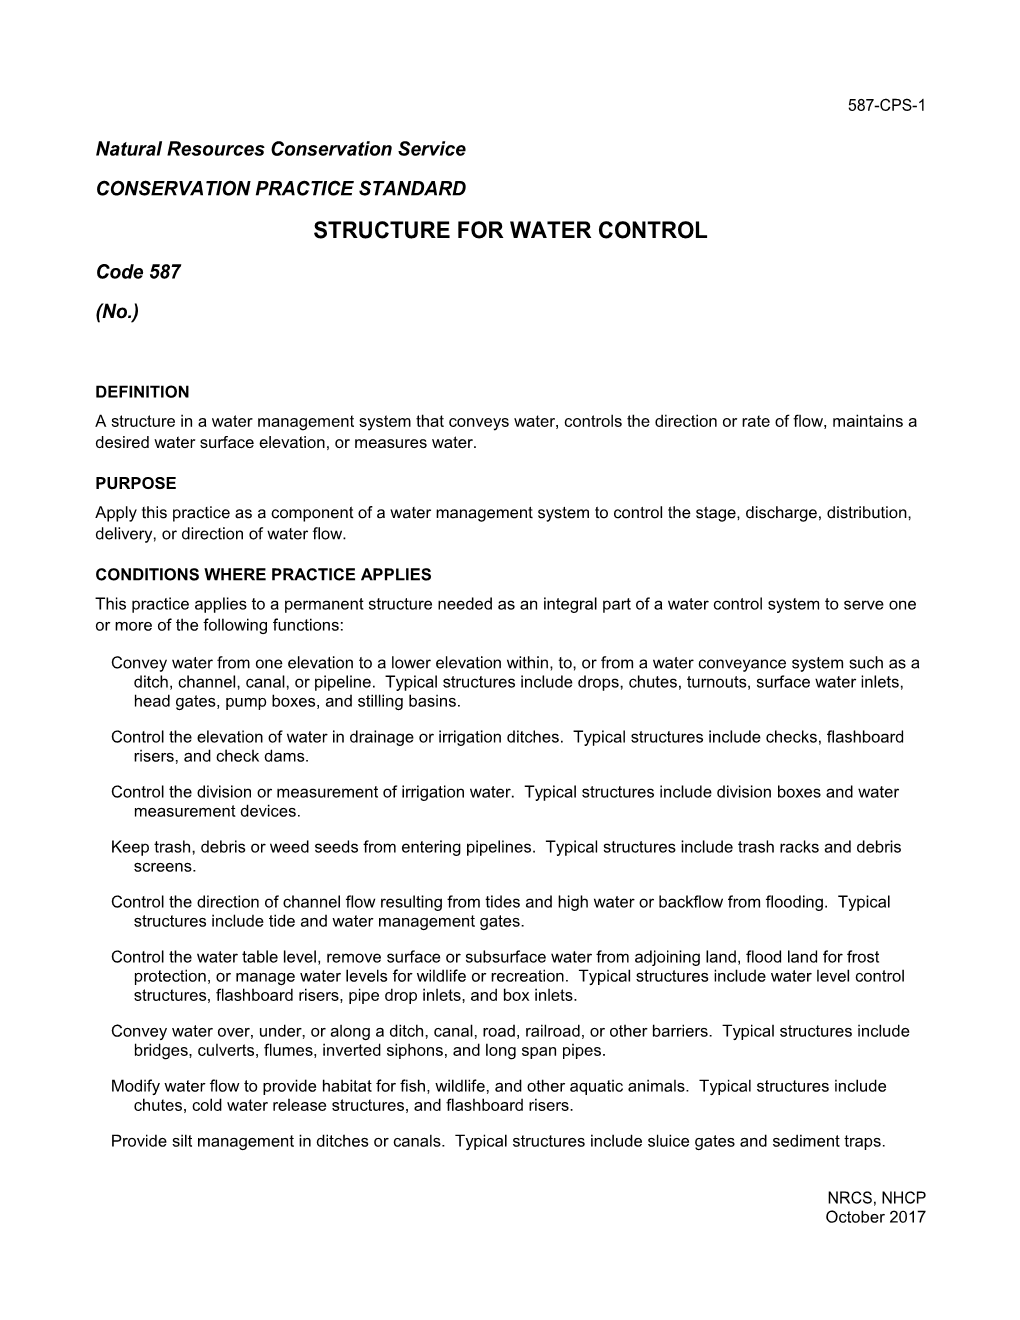 Conservation Practice Standard Structure for Water Control (Code 587)